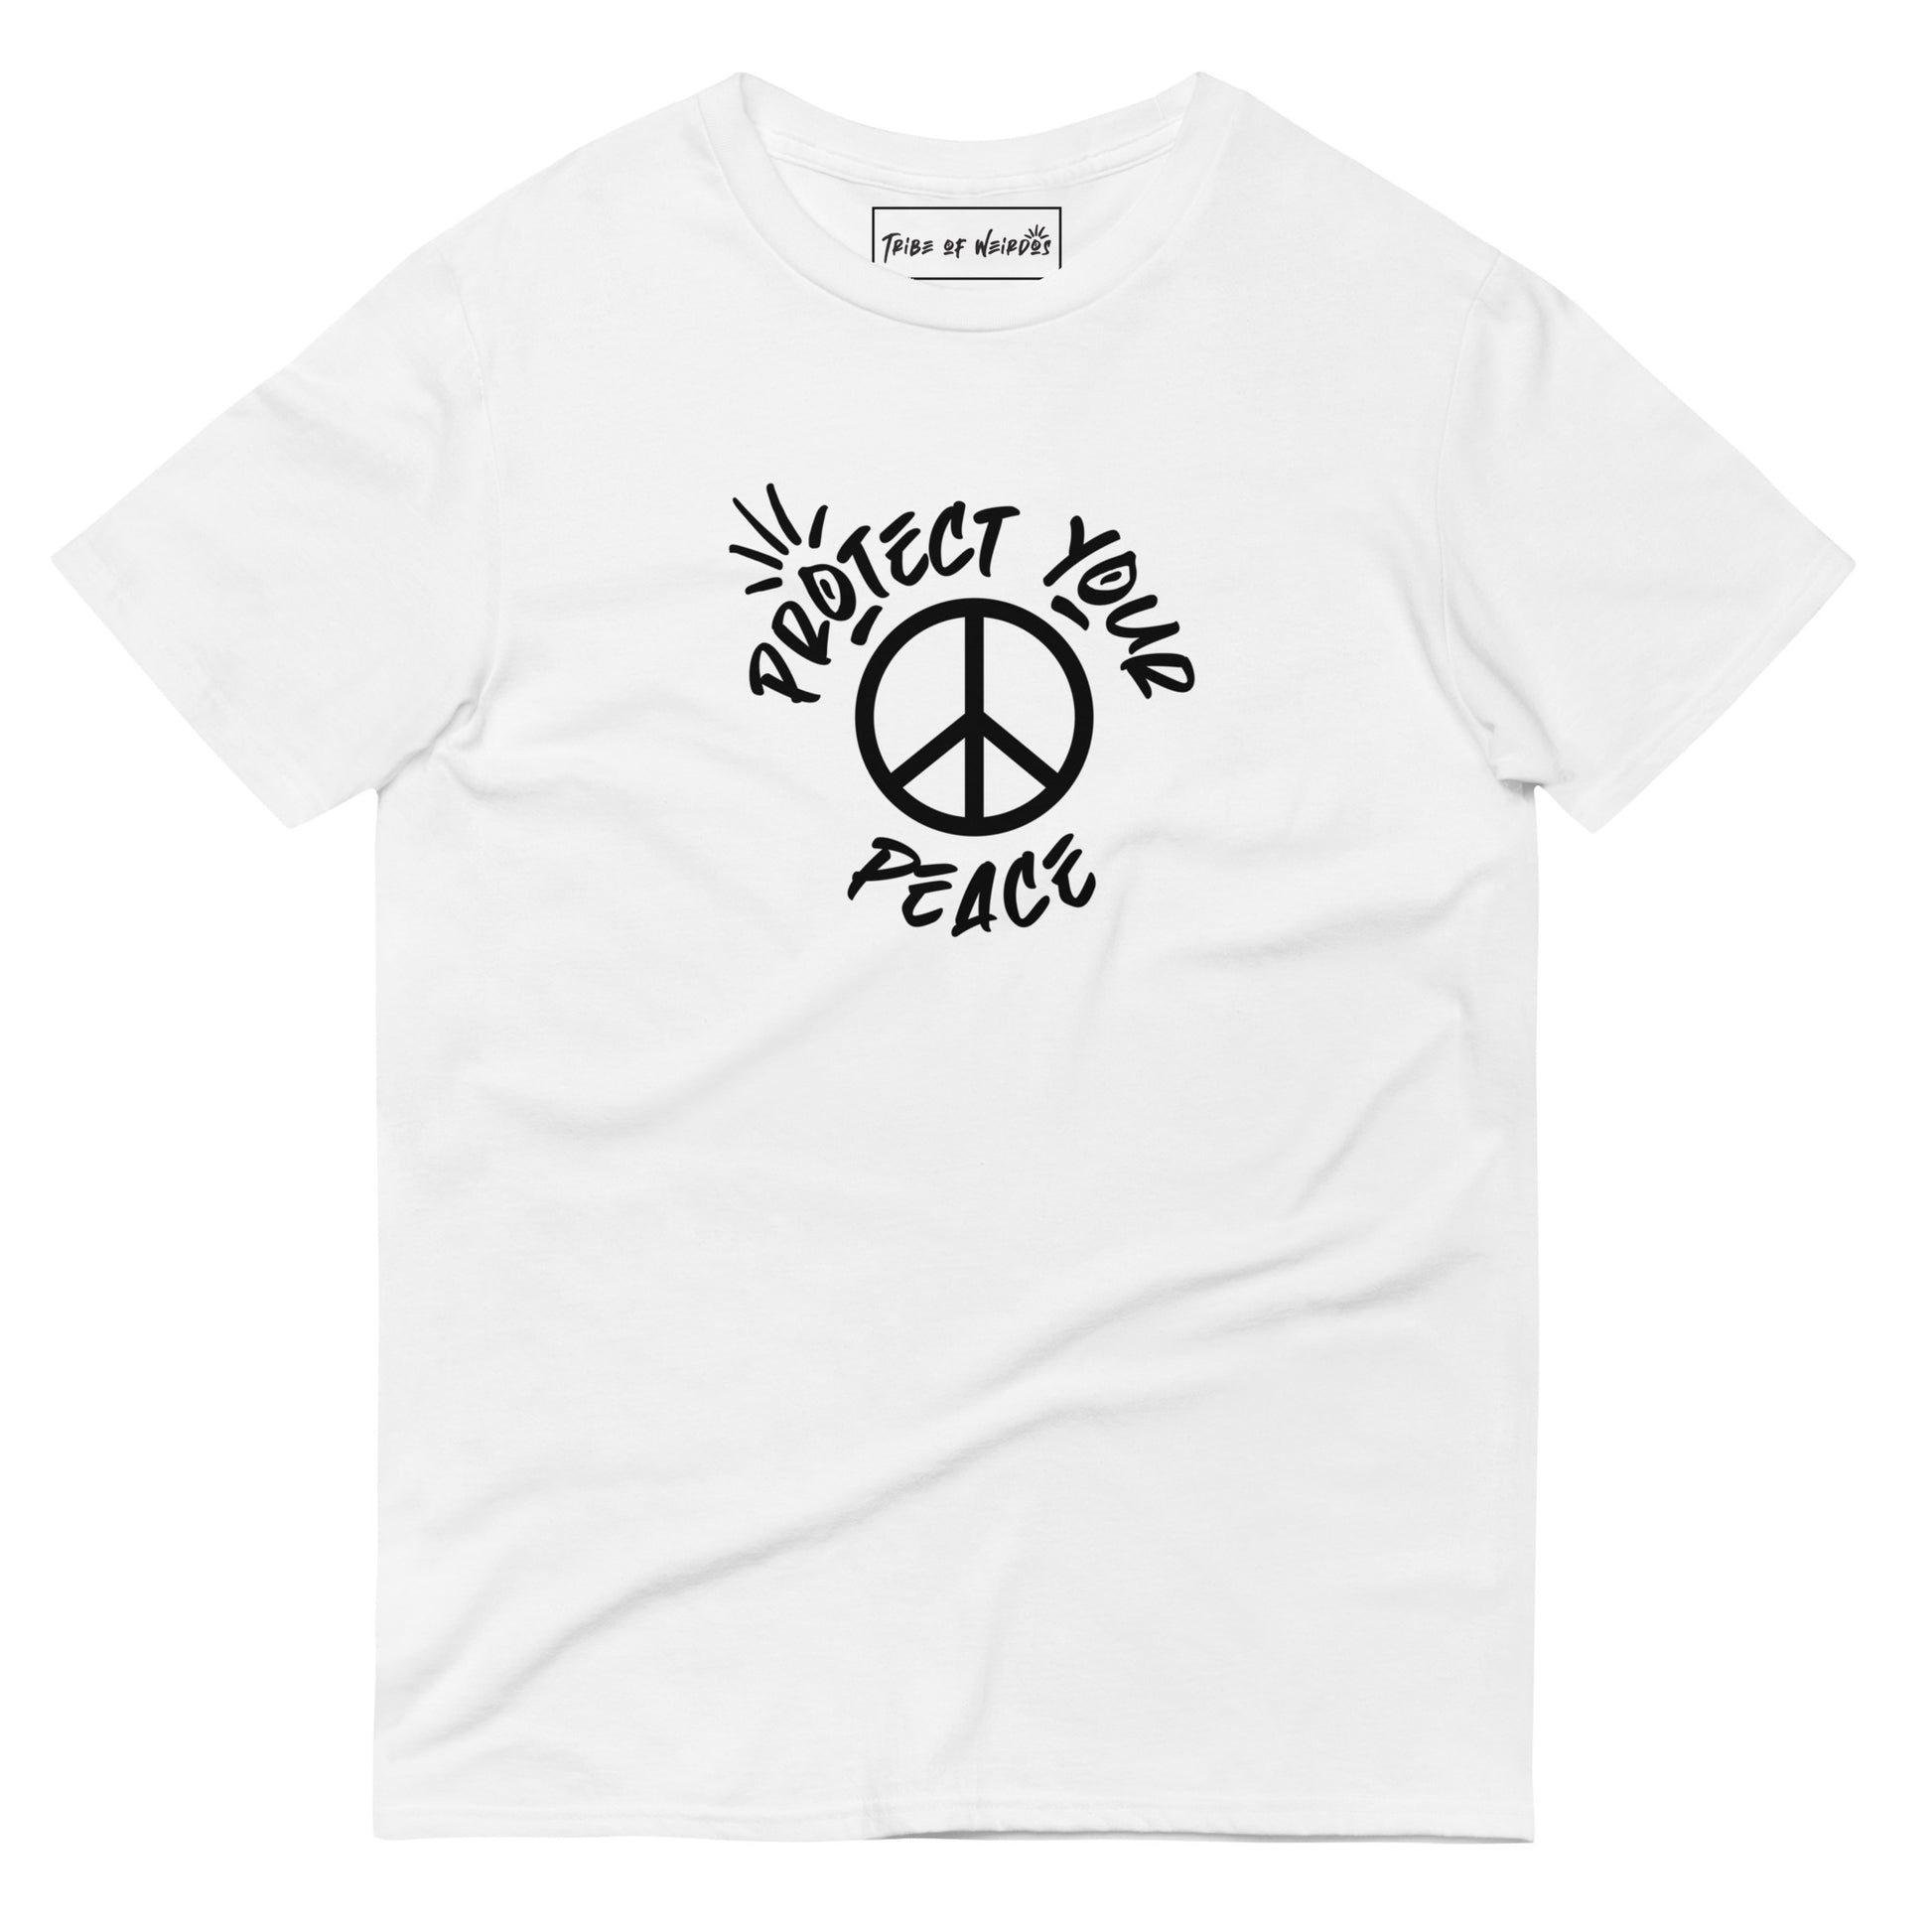 Image of 'Join The Tribe' unisex T-shirt from Tribe of Weirdos, featuring bold text promoting unity and inner peace on a stylish, casual fit.